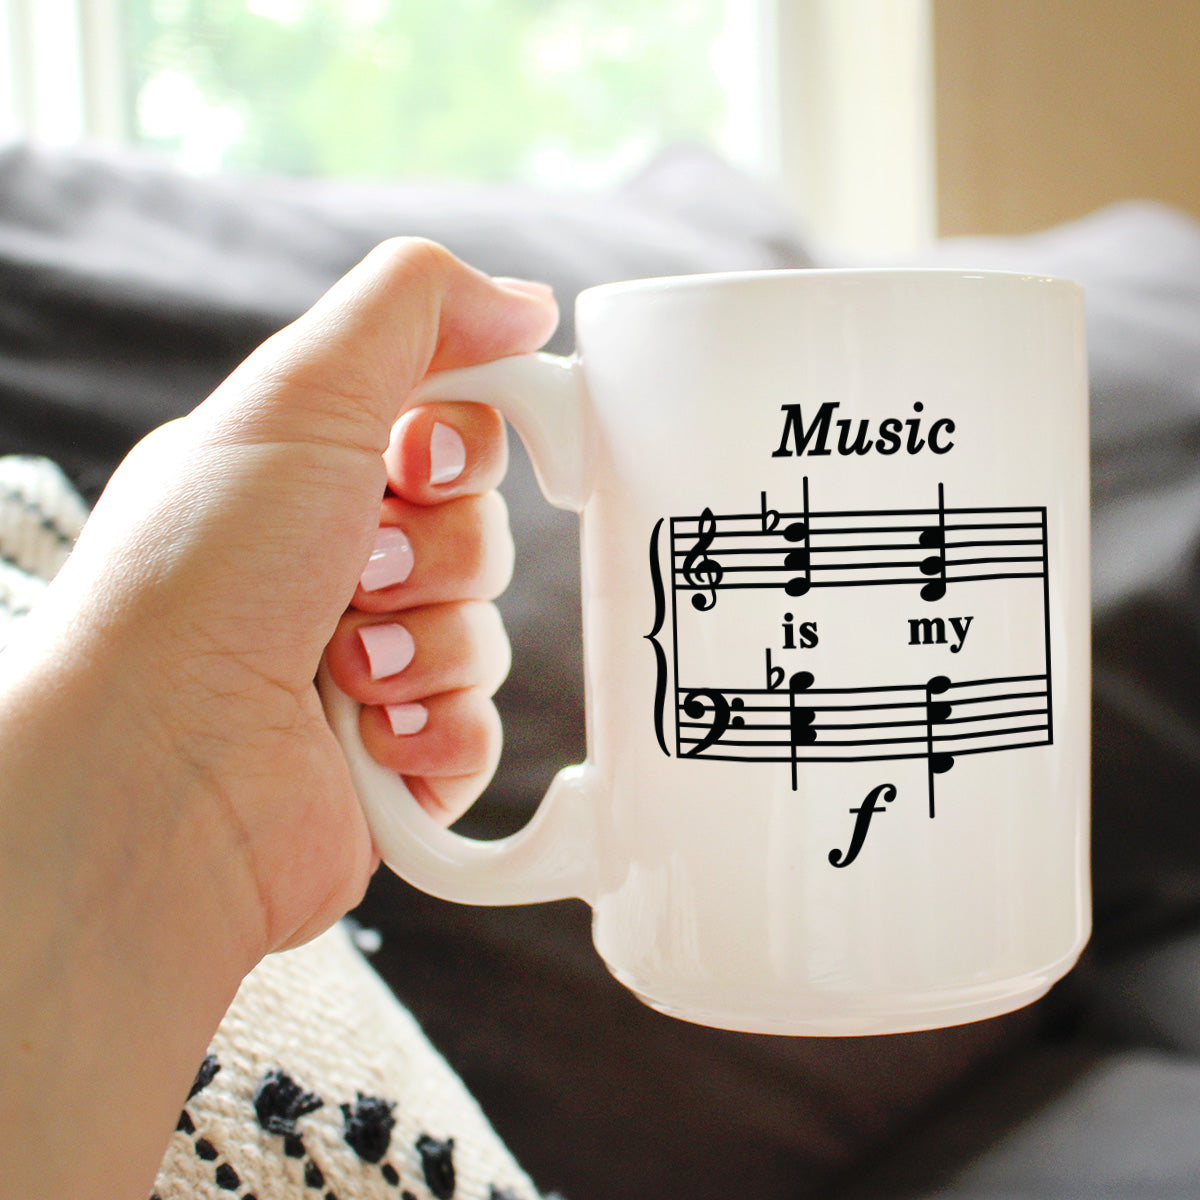 Music Is My Forte Coffee Mug - Funny Musician Gifts and Musical Accessories